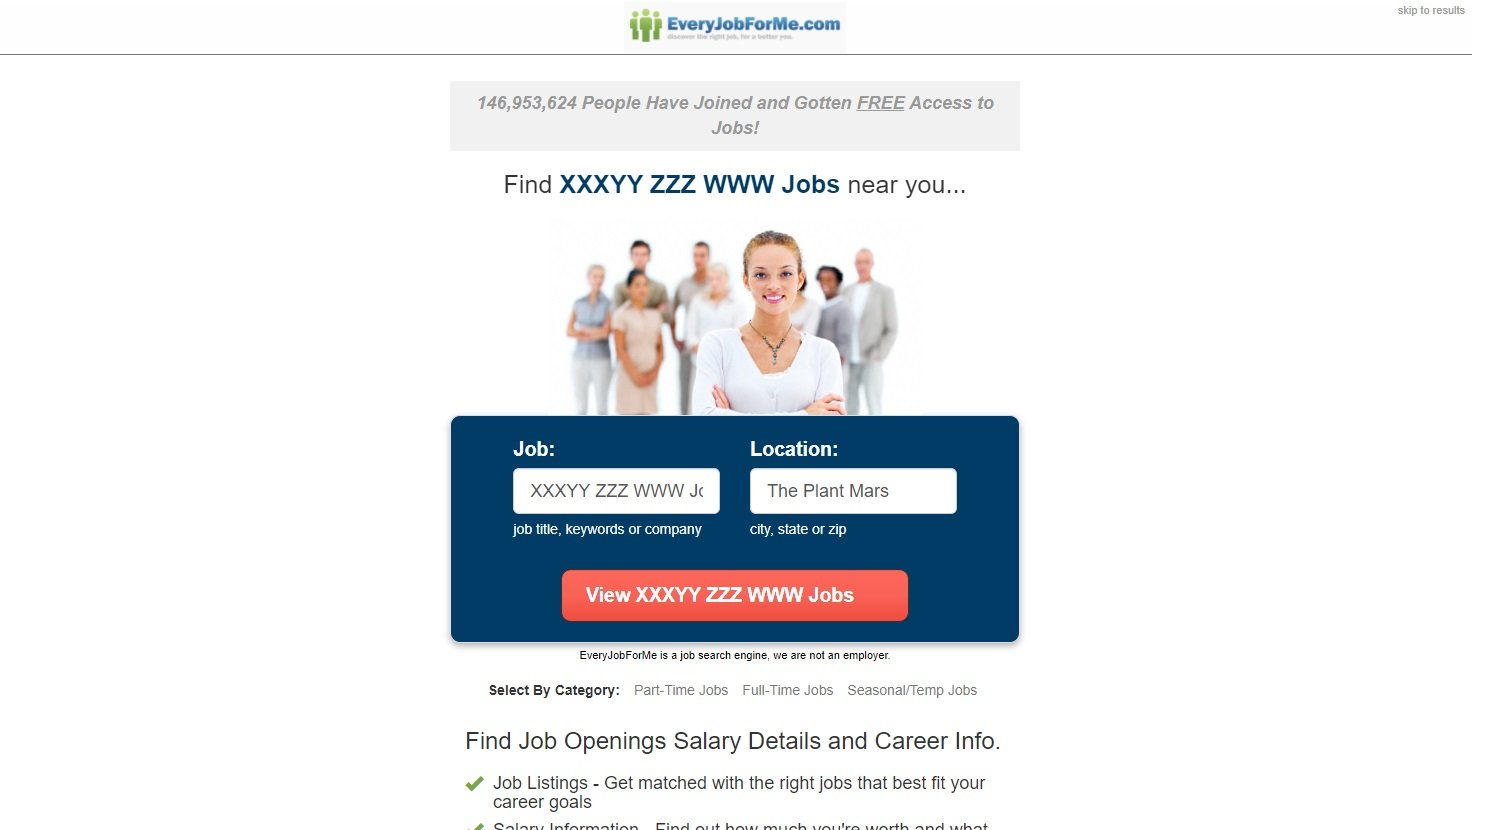 Every Job For Me Job Search Fake Result at www.everyjobforme.com